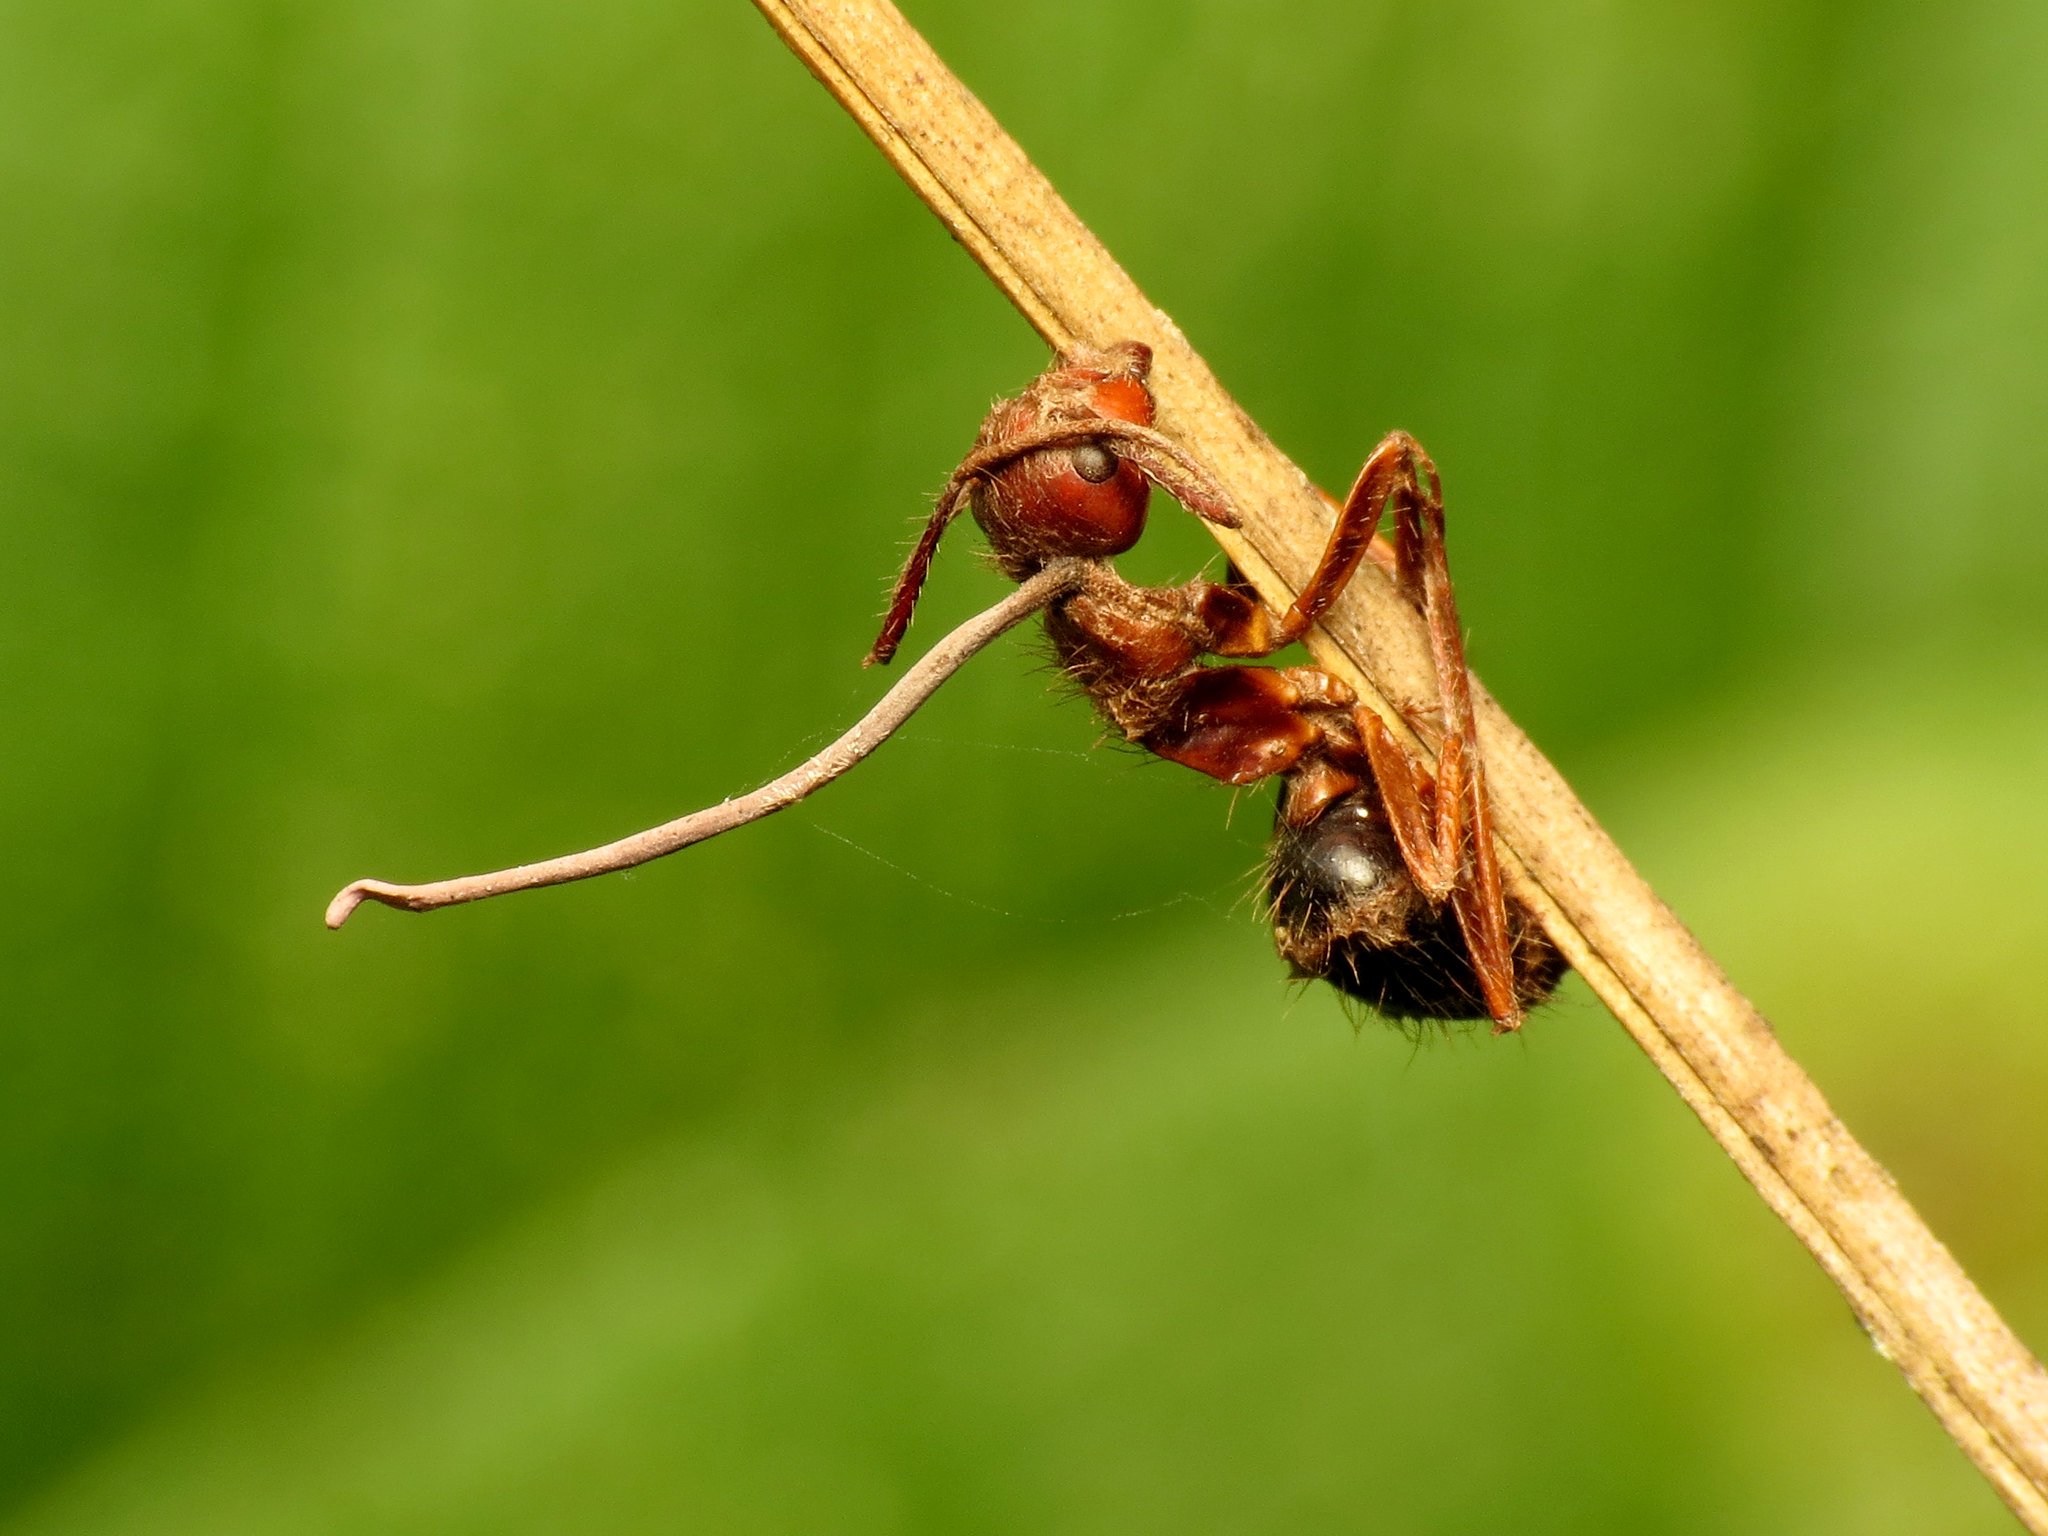 ant climbing on a branch with a long growth coming out of its neck